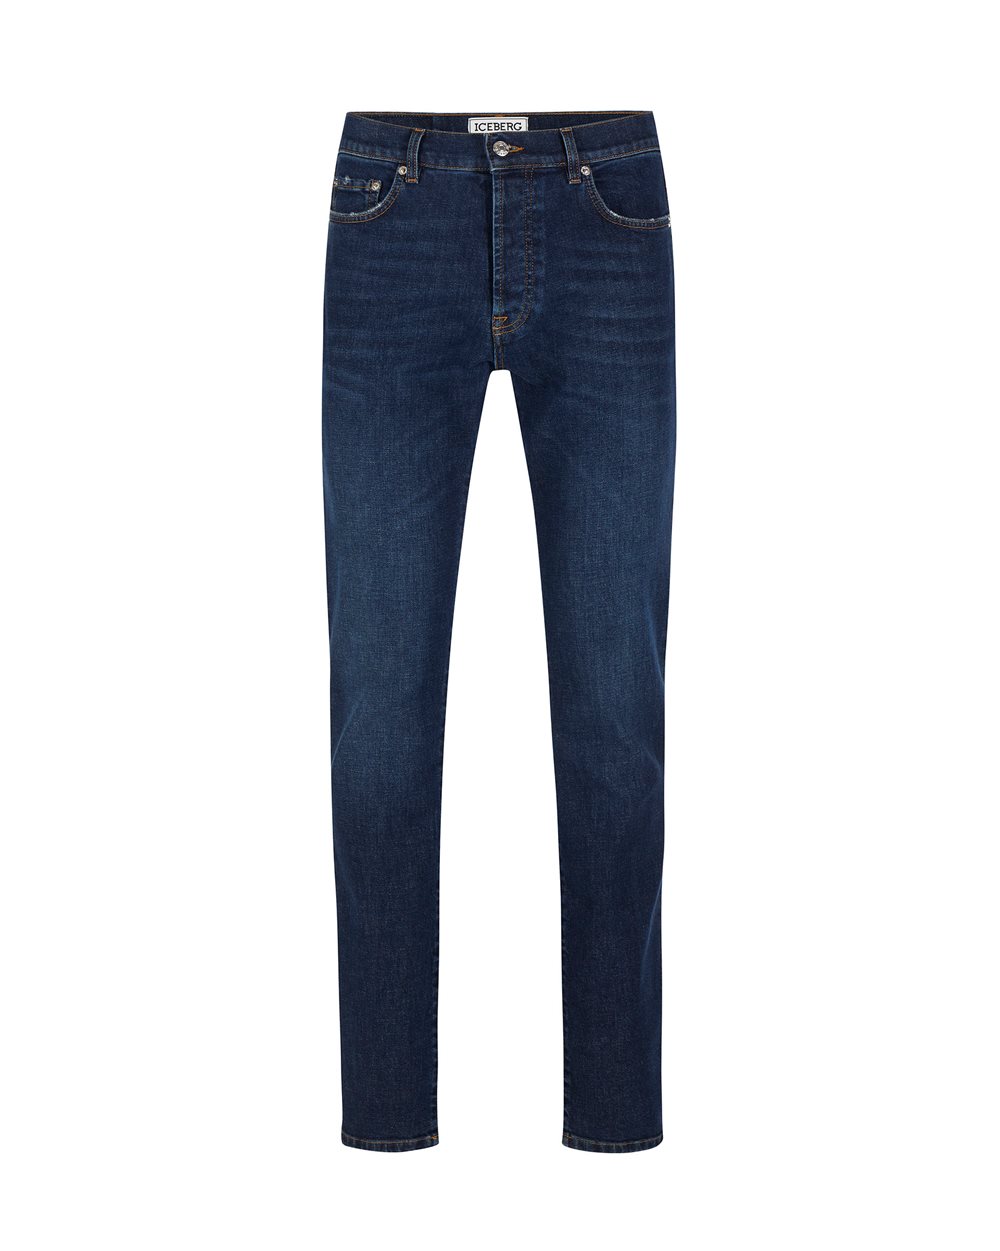 Classic 5-pocket blue jeans - Trousers | Iceberg - Official Website